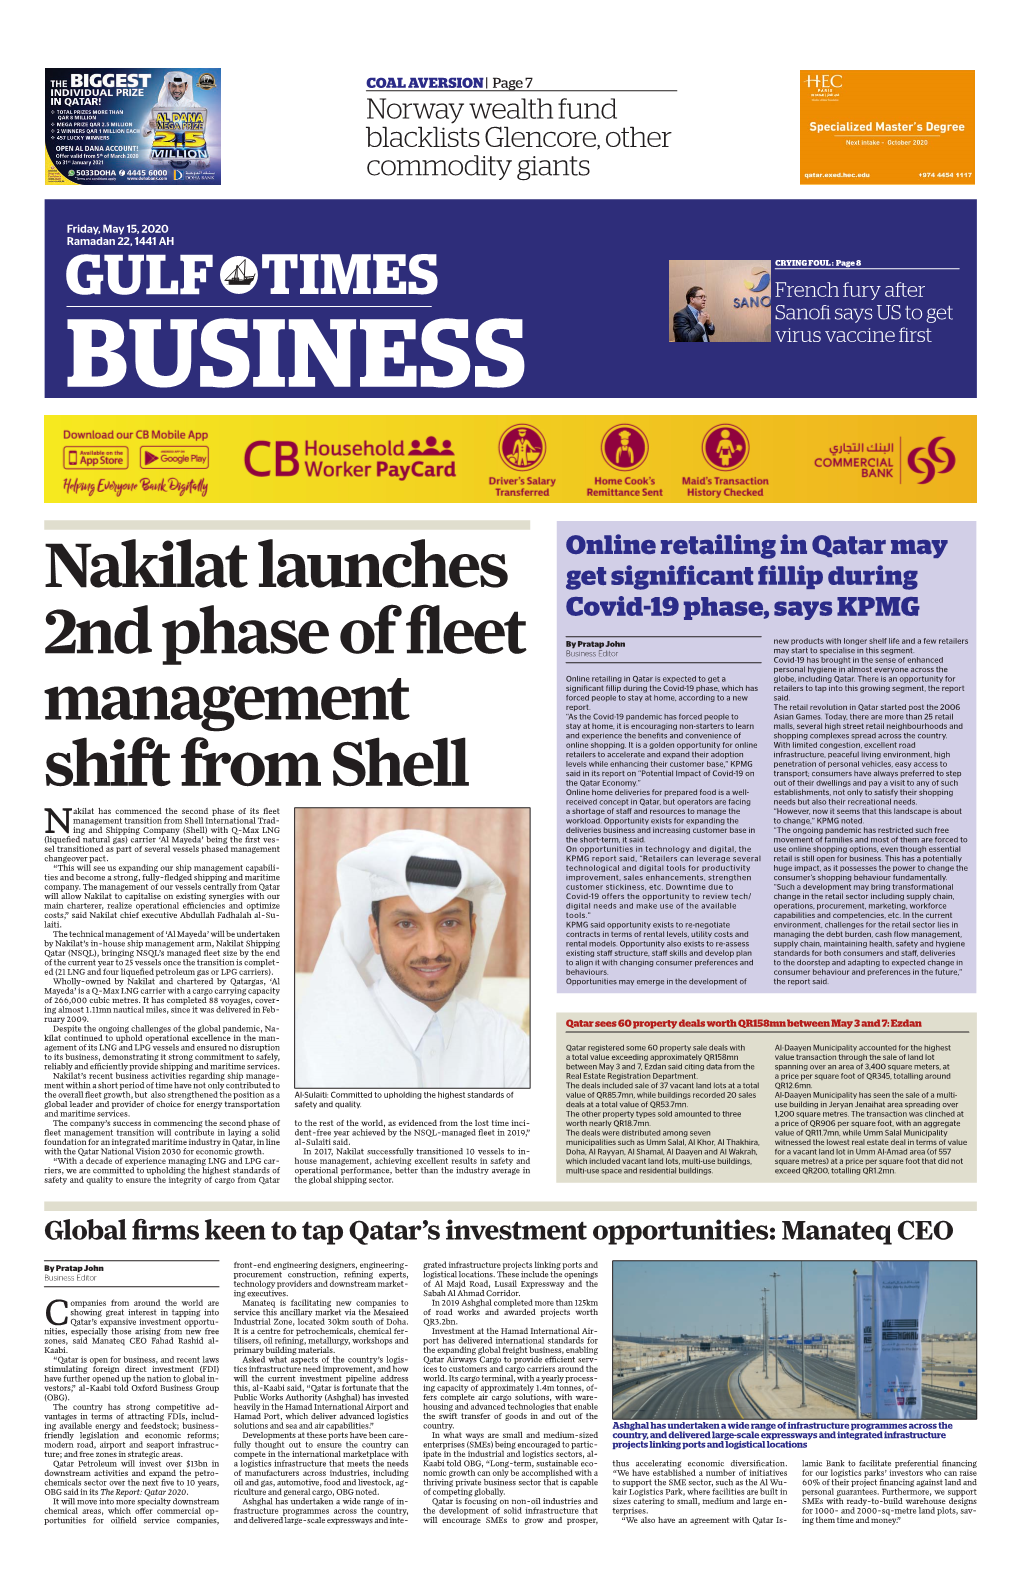 Nakilat Launches 2Nd Phase of Fleet Management Shift from Shell